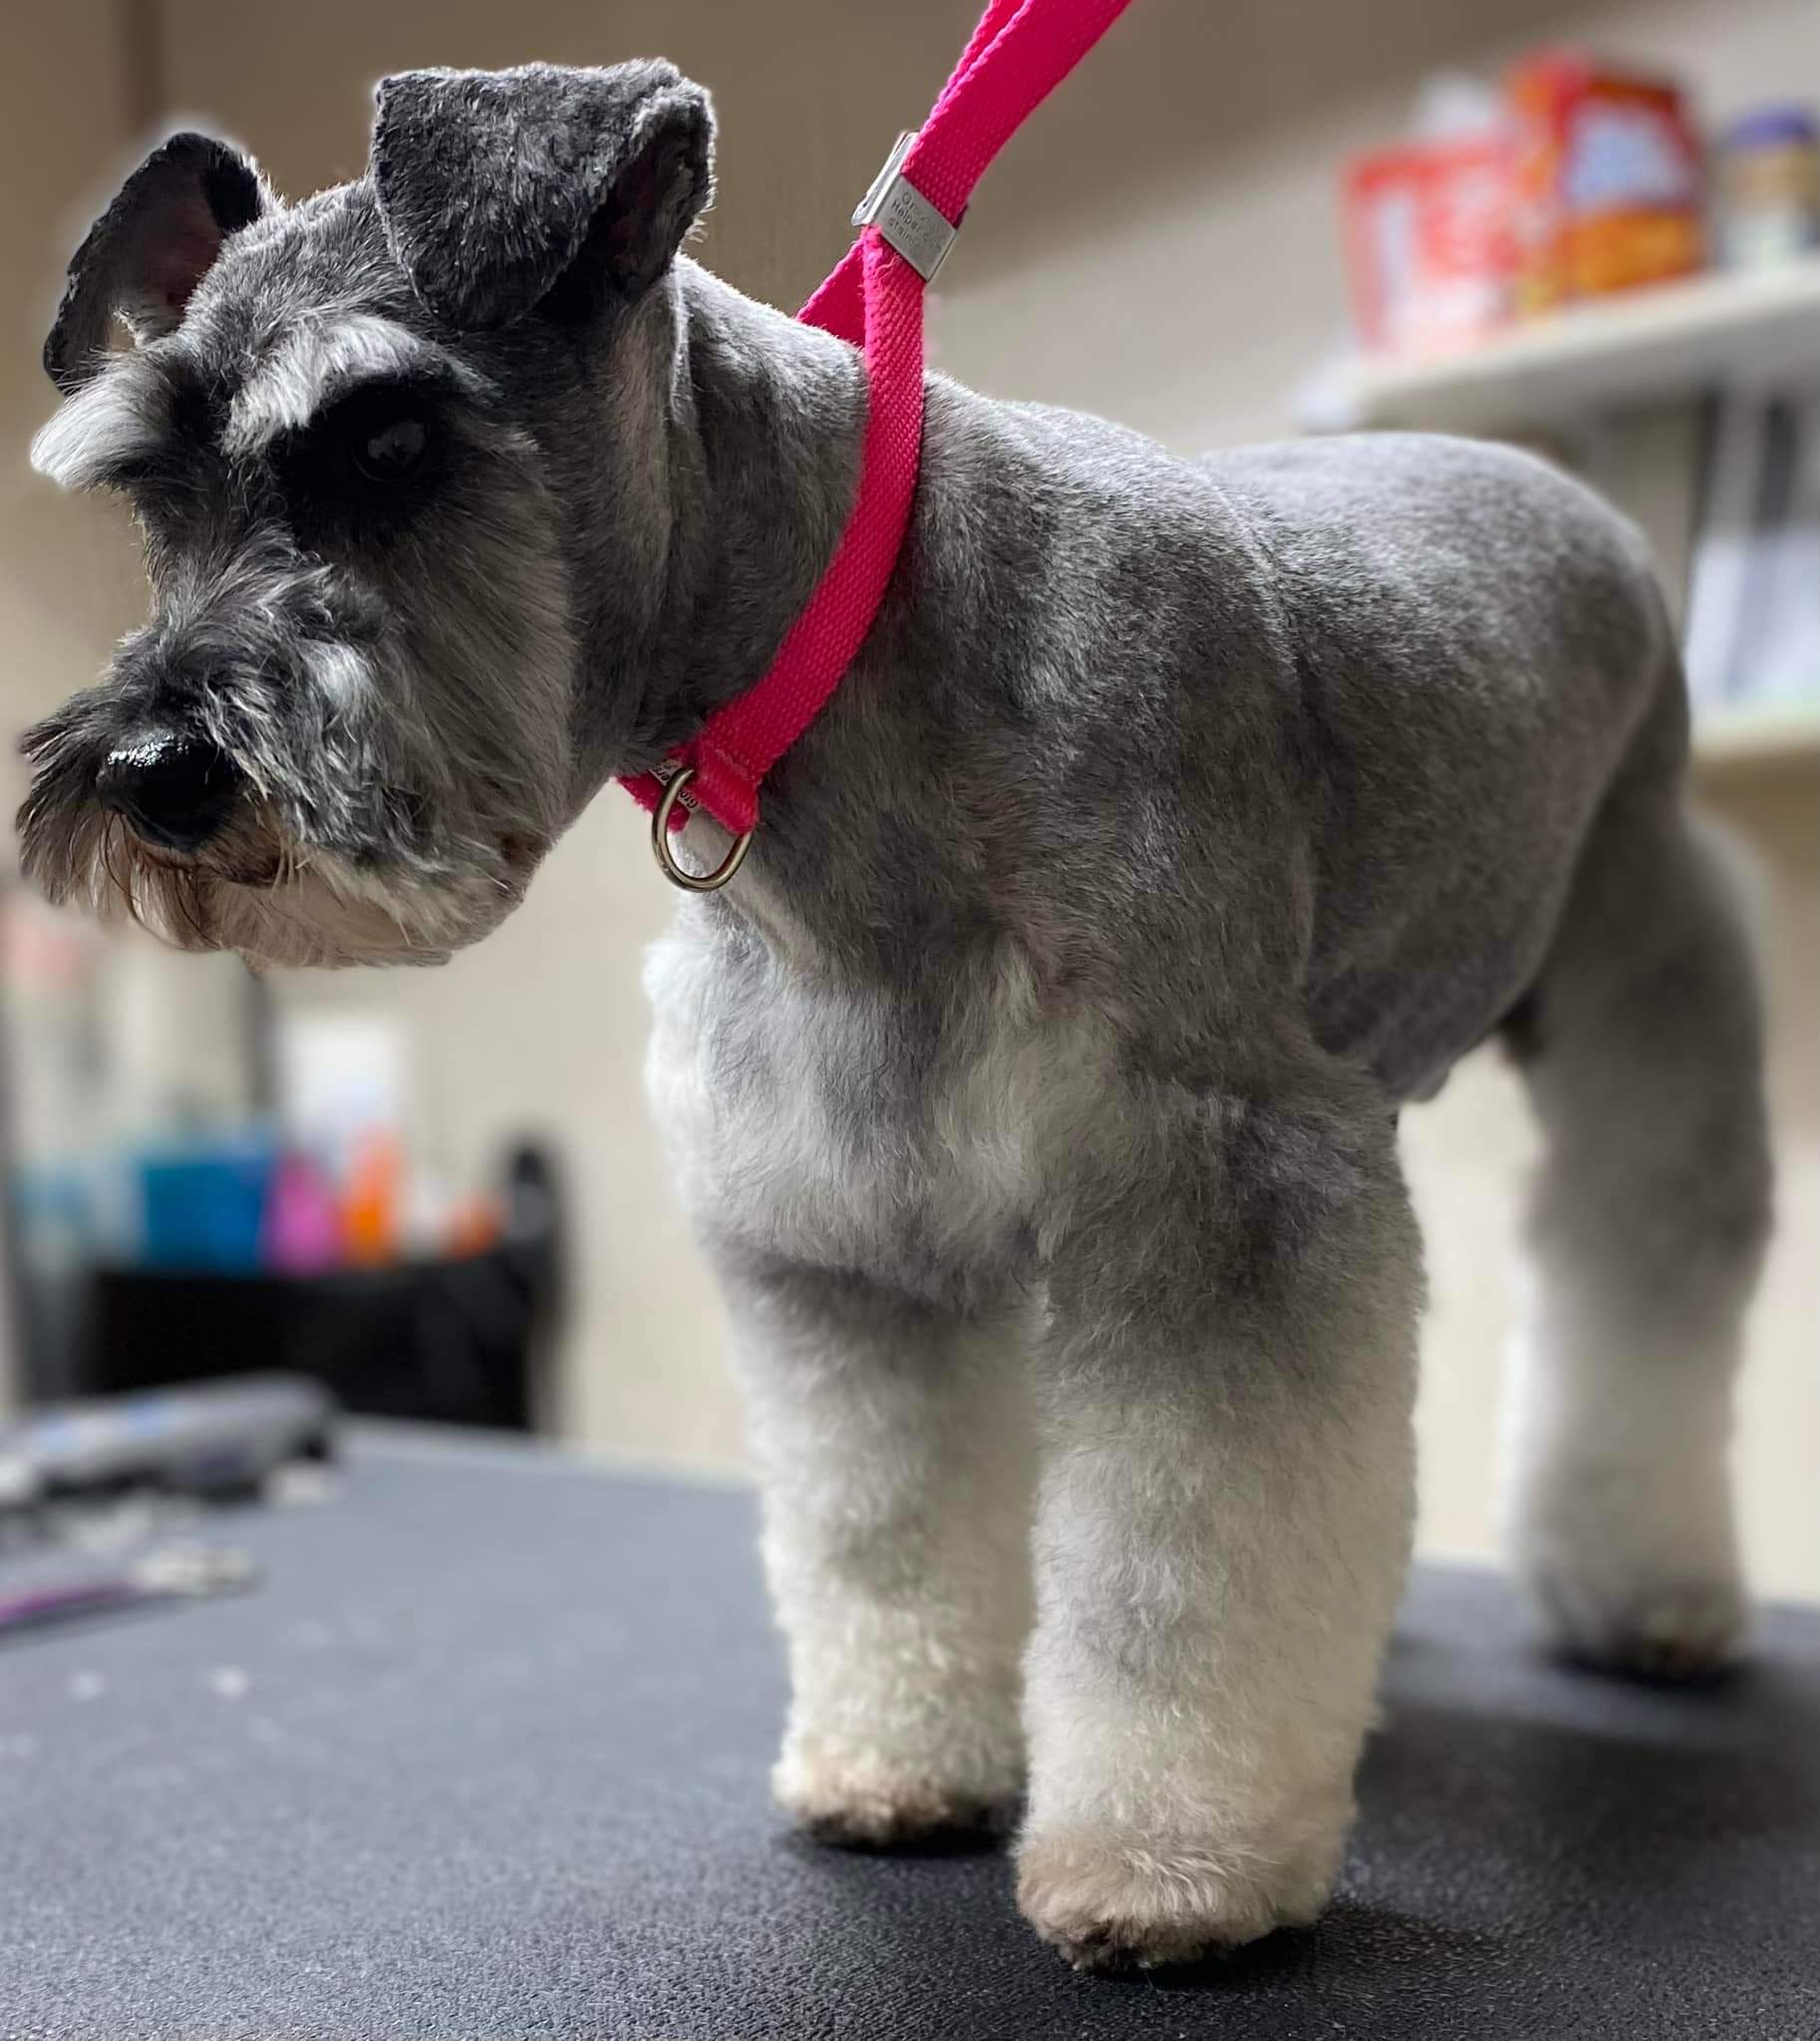 Schnauzer groomed by student at mastergroomersacademy.com